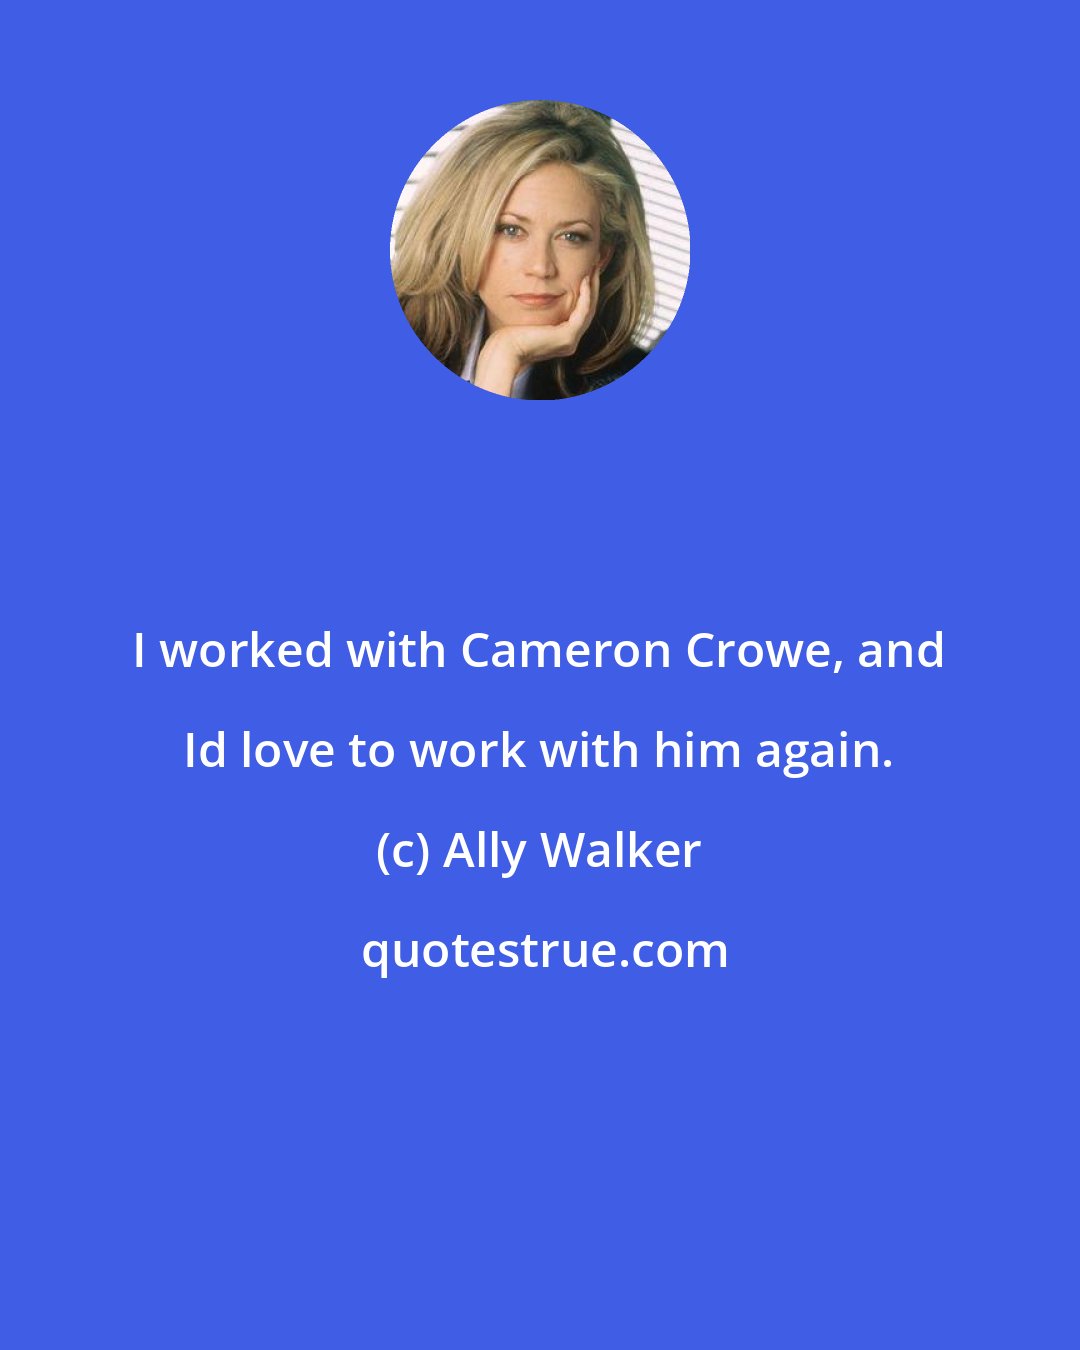 Ally Walker: I worked with Cameron Crowe, and Id love to work with him again.